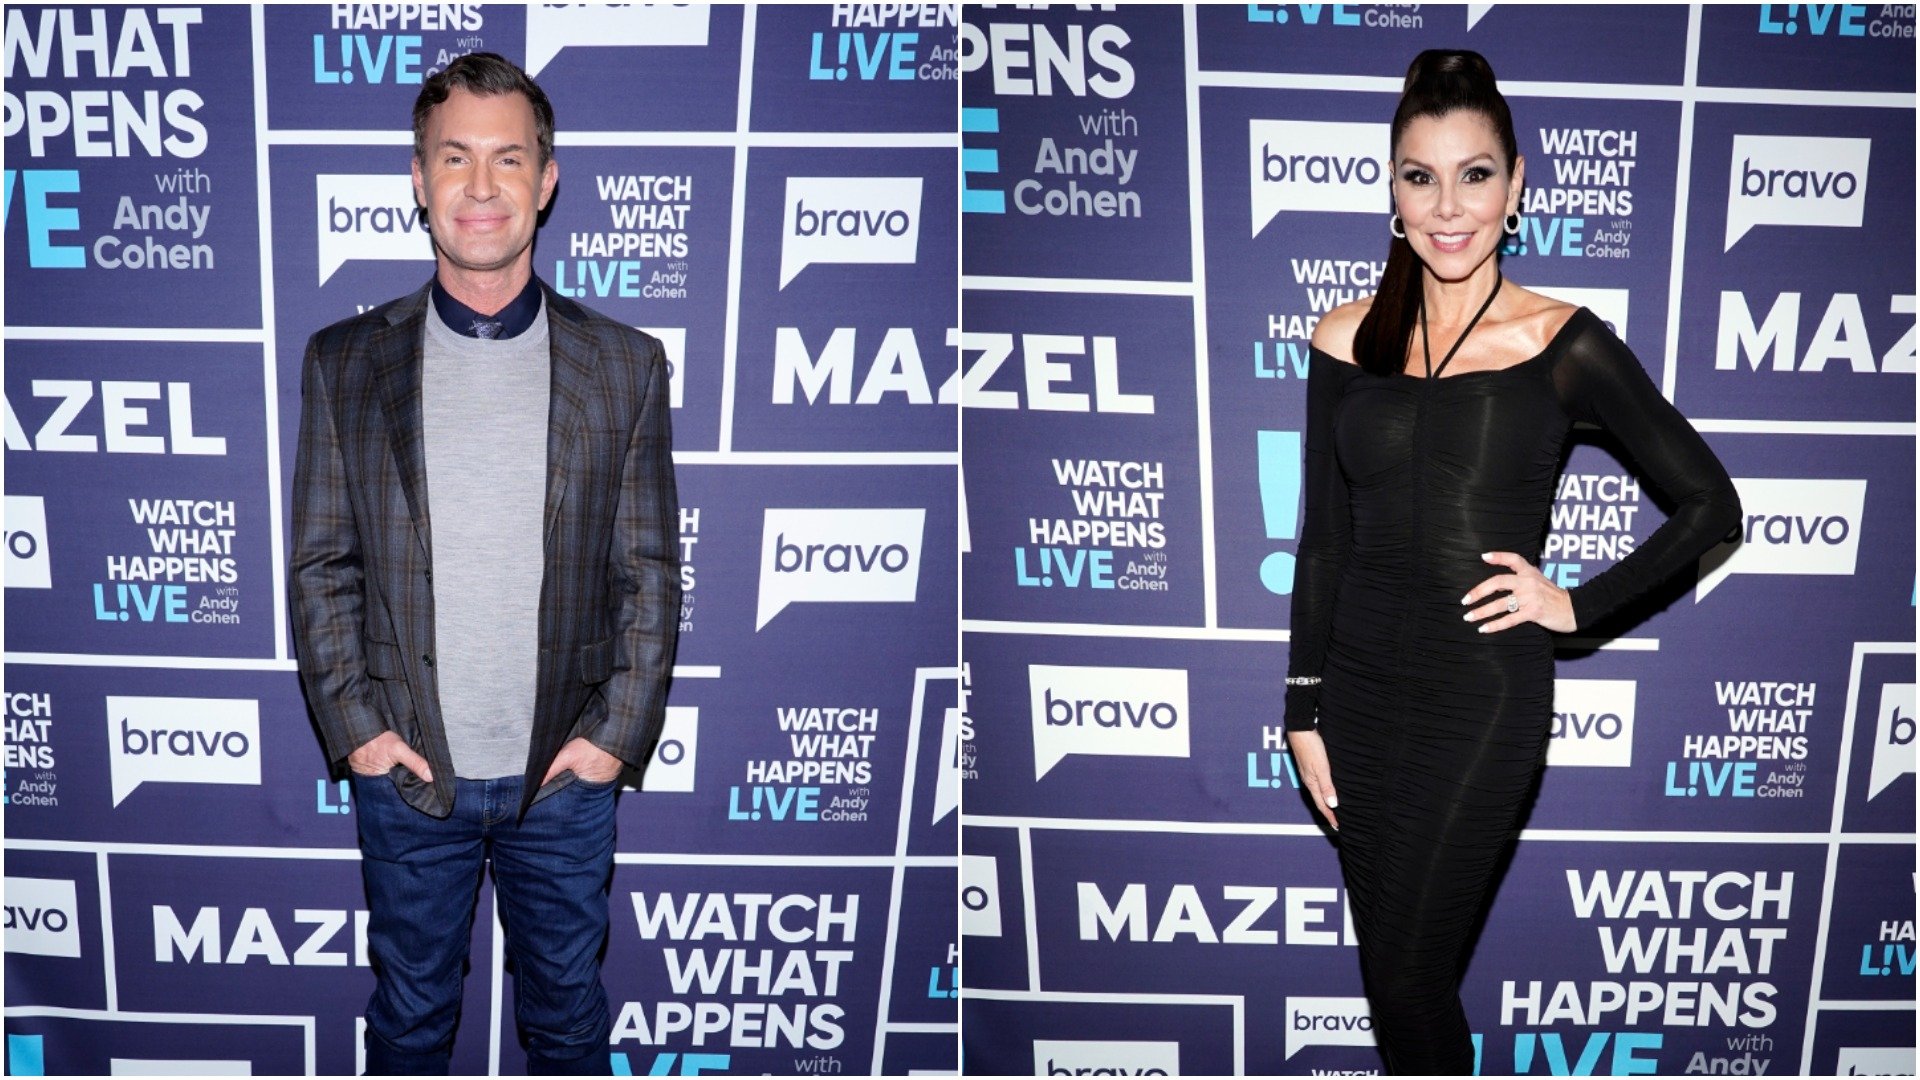 'RHOC' Heather Dubrow laughed at Jeff Lewis' comment she's a bad person